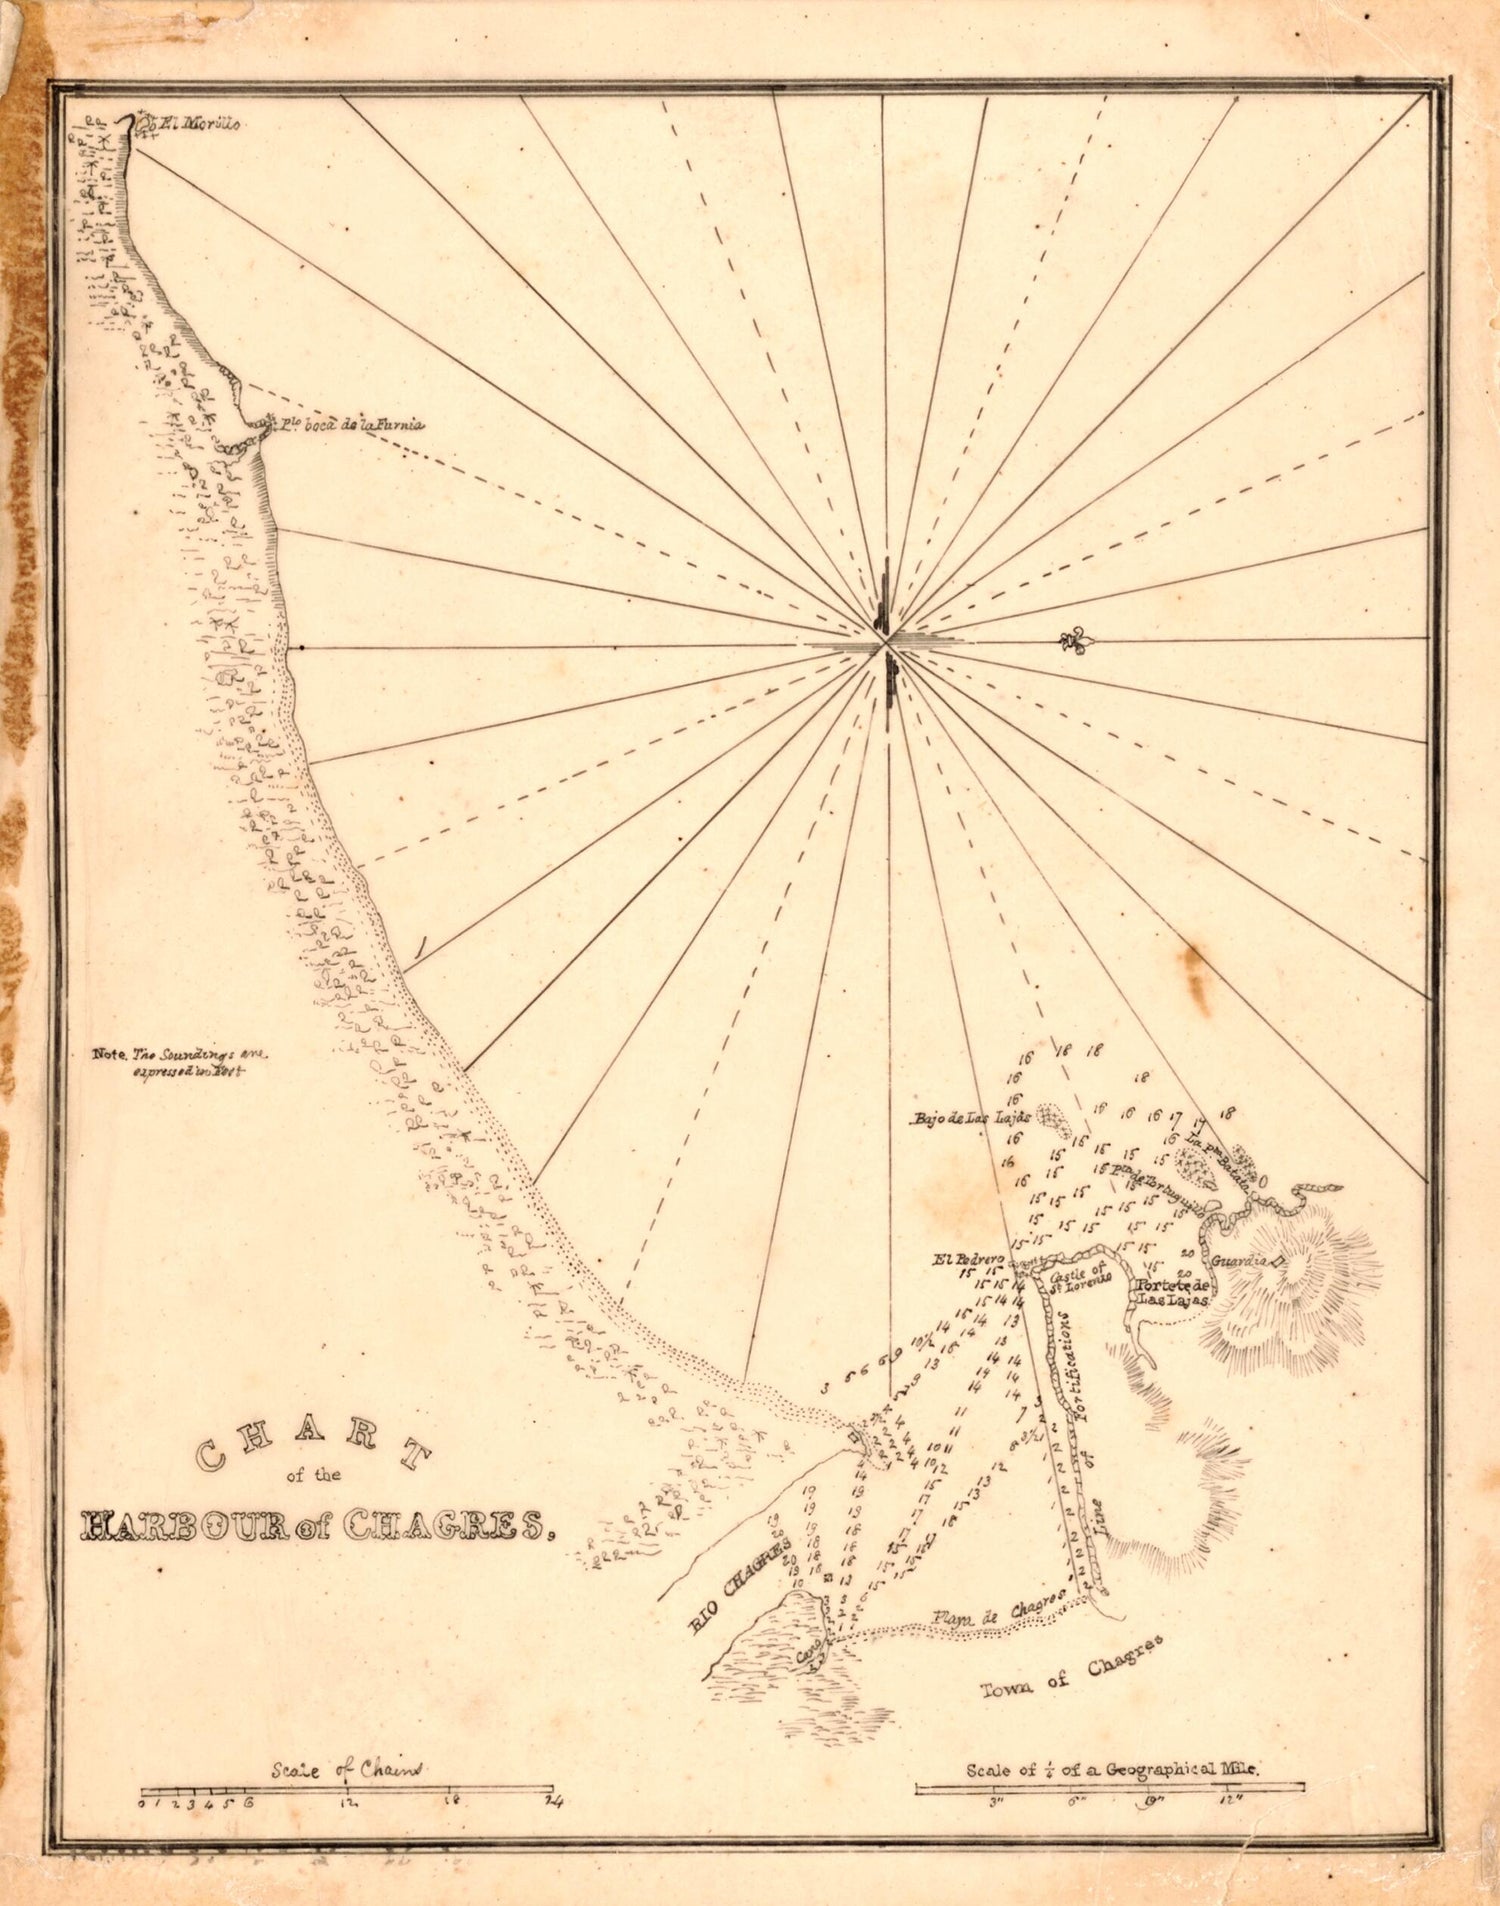 This old map of Chart of the Harbour of Chagres from 1838 was created by David Bates Douglass in 1838